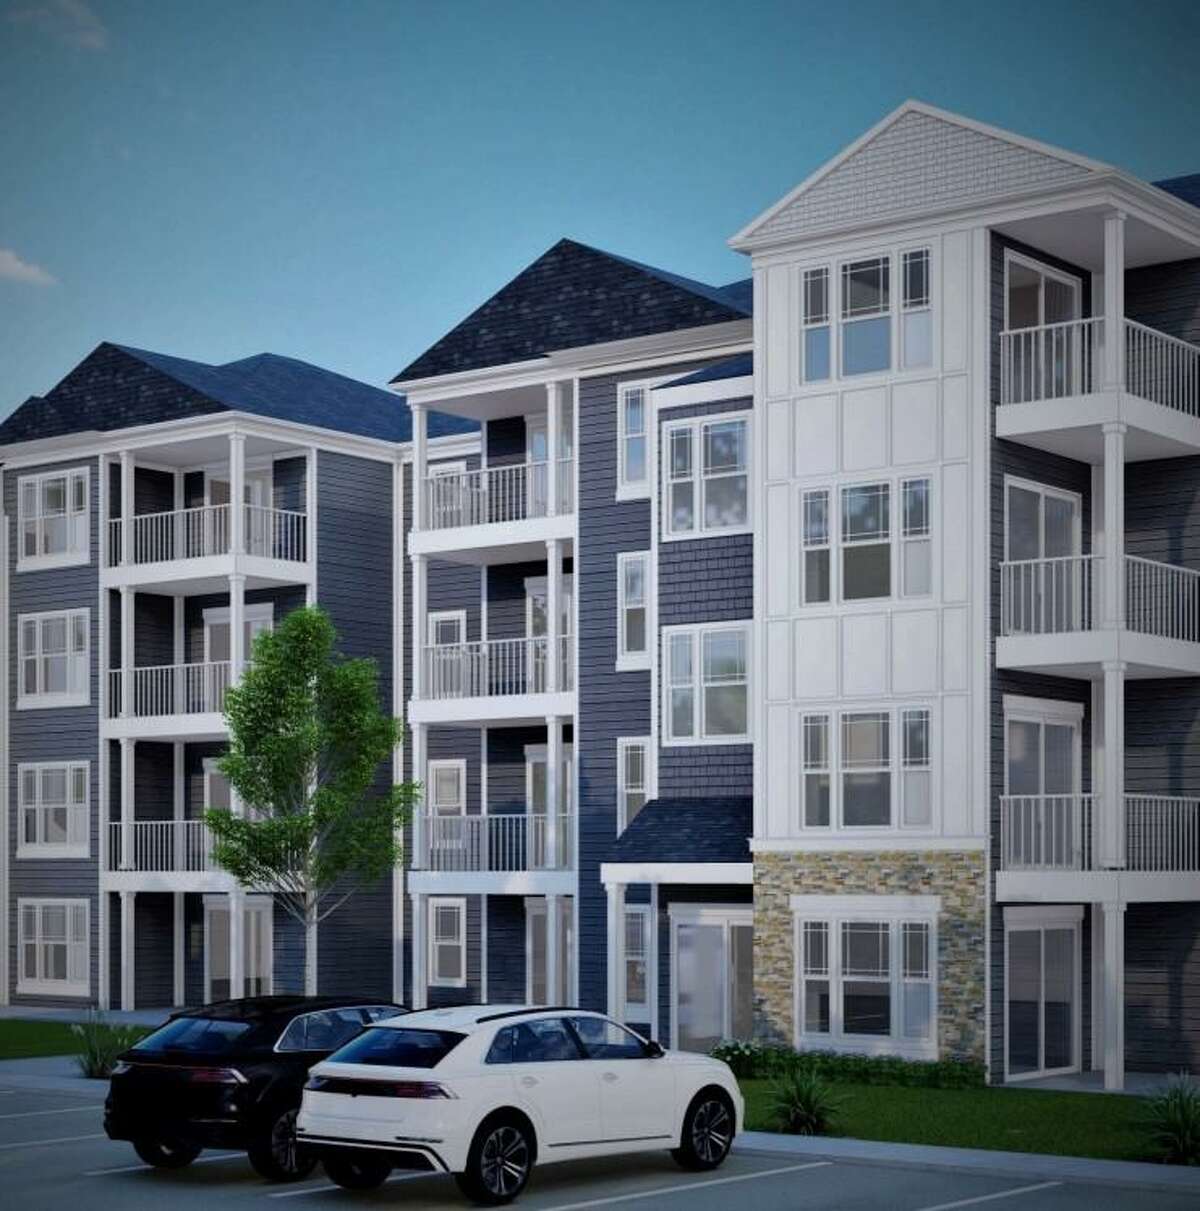 A rendering of the proposed apartment building on Bridgeport Avenue in Shelton at the current site of Langanke’s Florist.